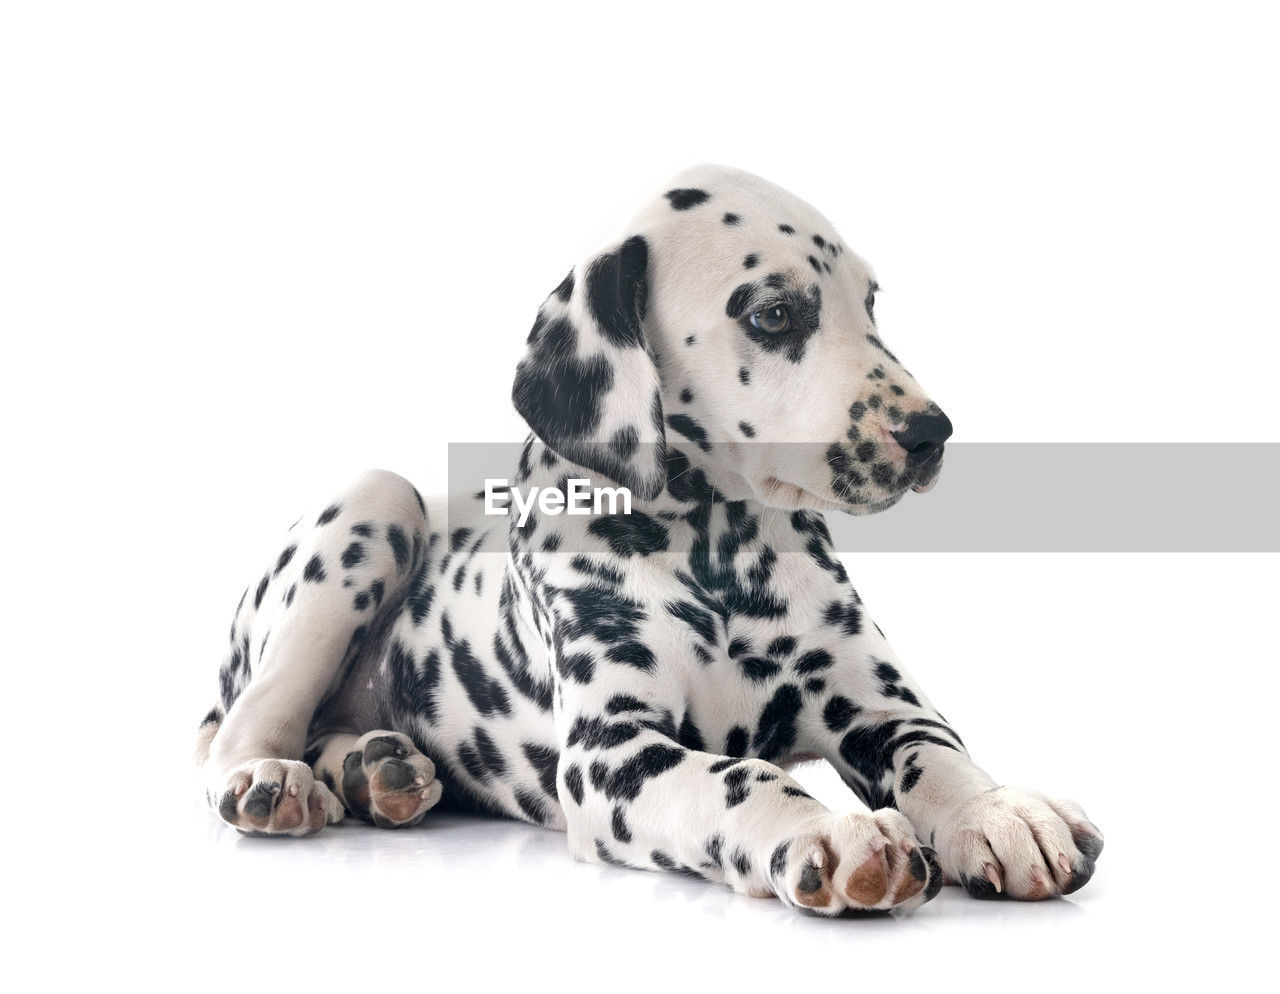 dalmatian, dalmatian dog, mammal, animal, pet, animal themes, spotted, domestic animals, dog, one animal, canine, cut out, cute, carnivore, white, looking, studio shot, sitting, white background, purebred dog, animal markings, relaxation, no people, indoors, young animal, portrait